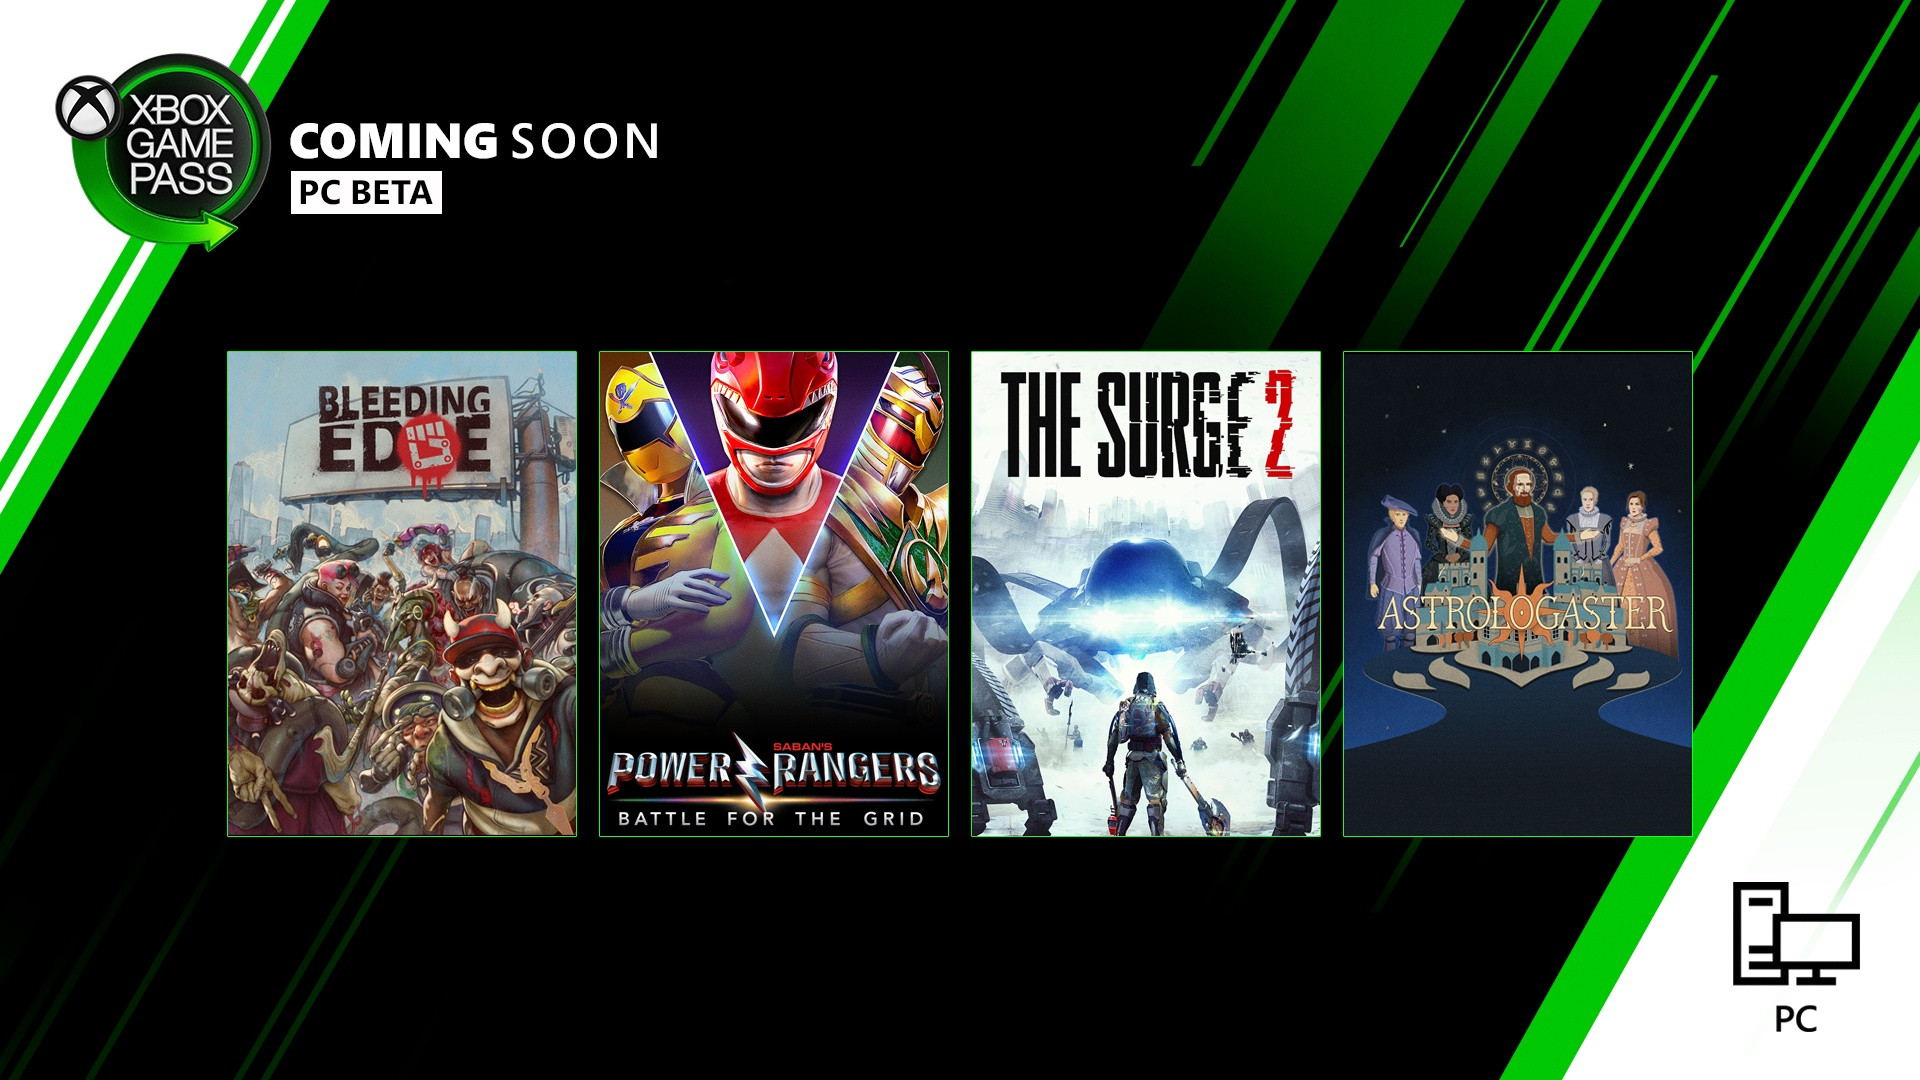 Xbox Game Pass March: Bleeding Edge and The Surge 2 along with new